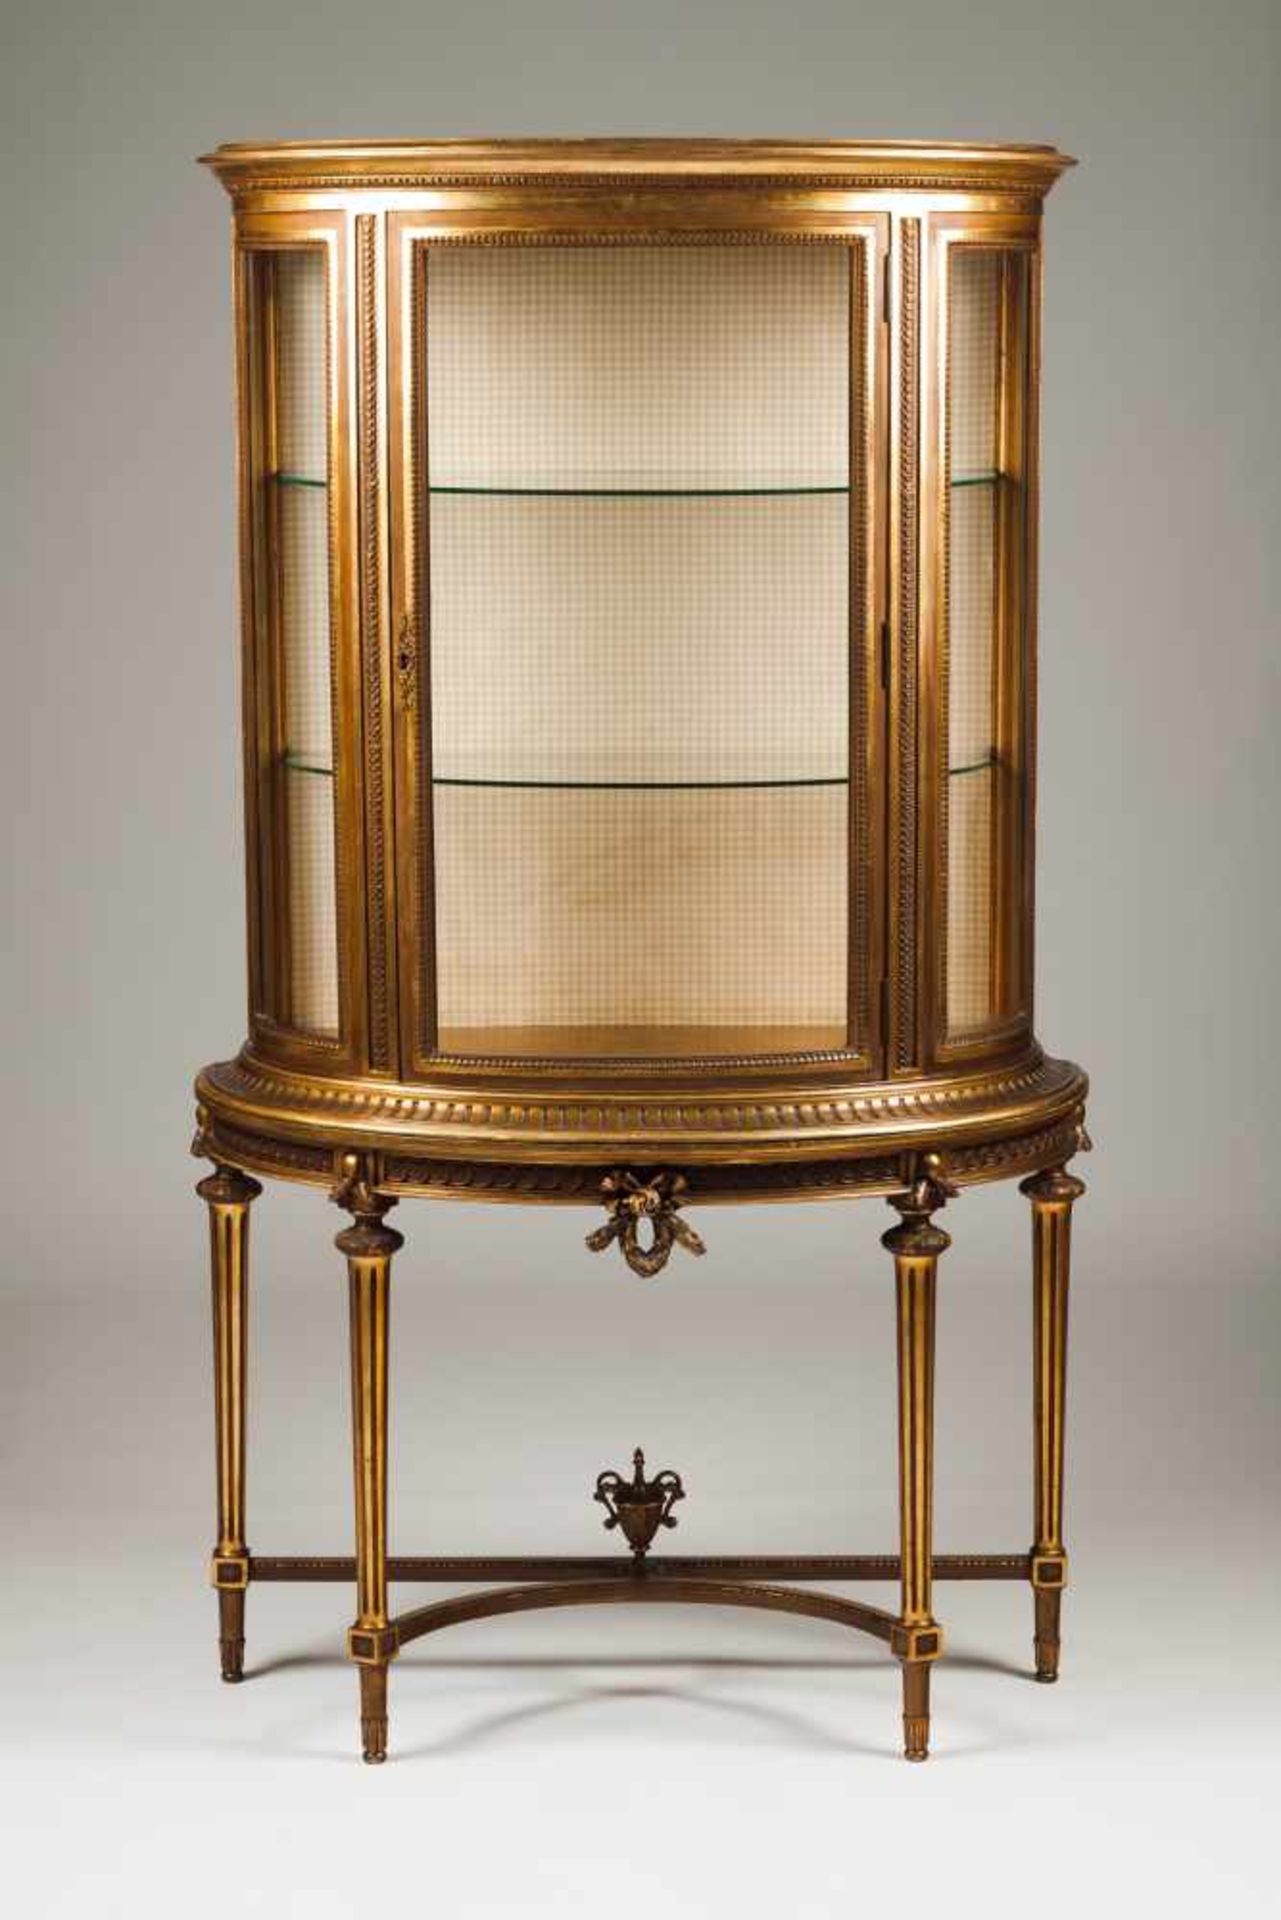 A Louis XVI style demi-lune showcaseGilt wood with carved decoration Interior with glass shelves20th